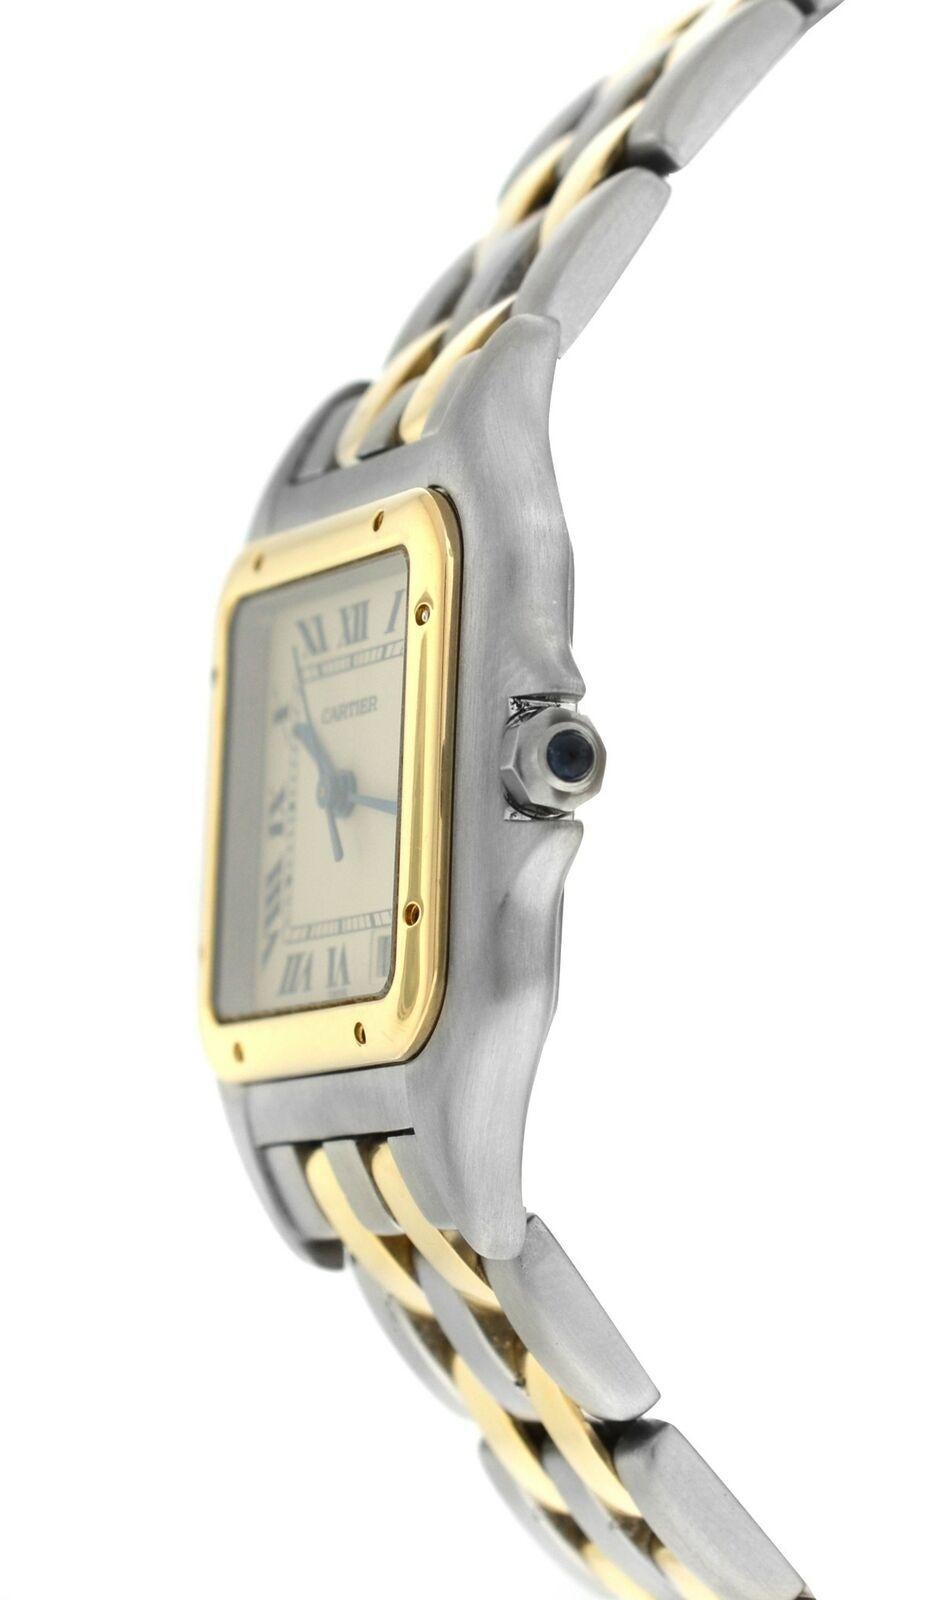 Brand	Cartier
Model	Panthere 187949
Gender	Ladies
Condition	Pre-owned
Movement	Swiss Quartz
Case Material	Stainless Steel & 18K Yellow Gold
Bracelet / Strap Material	
Stainless Steel  & 18K Yellow Gold

Clasp / Buckle Material	
Stainless Steel